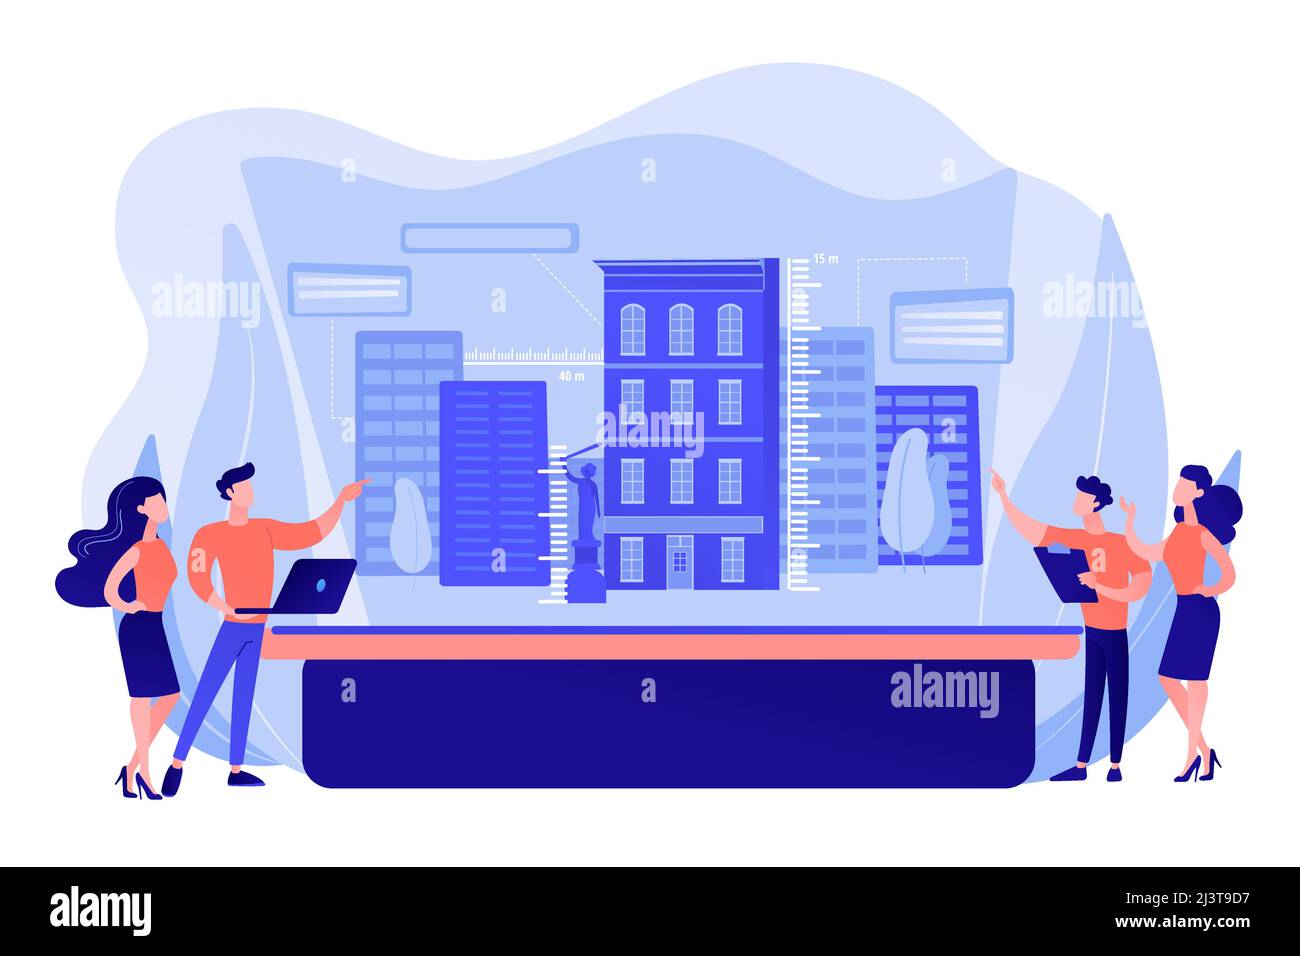 Augmented reality urban modeling, city VR experience. Interactive design visualization, virtuality architecture, virtual reality experiences concept. Stock Vector